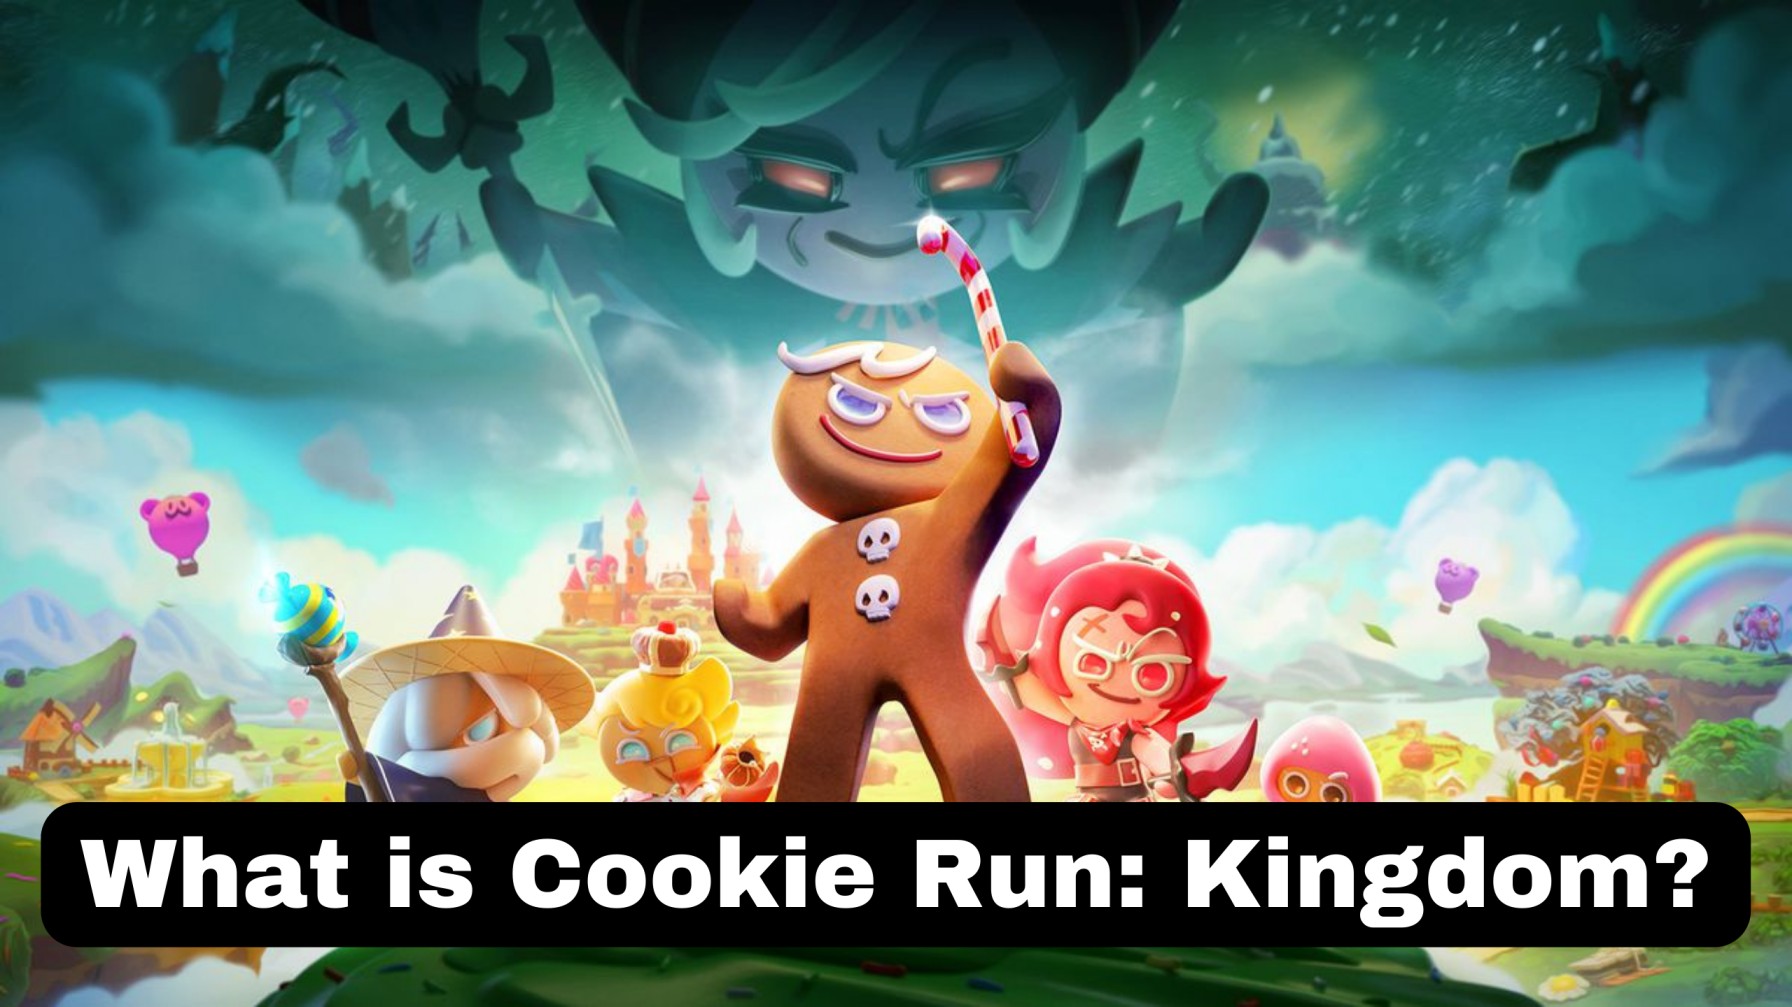 What is Cookie Run Kingdom